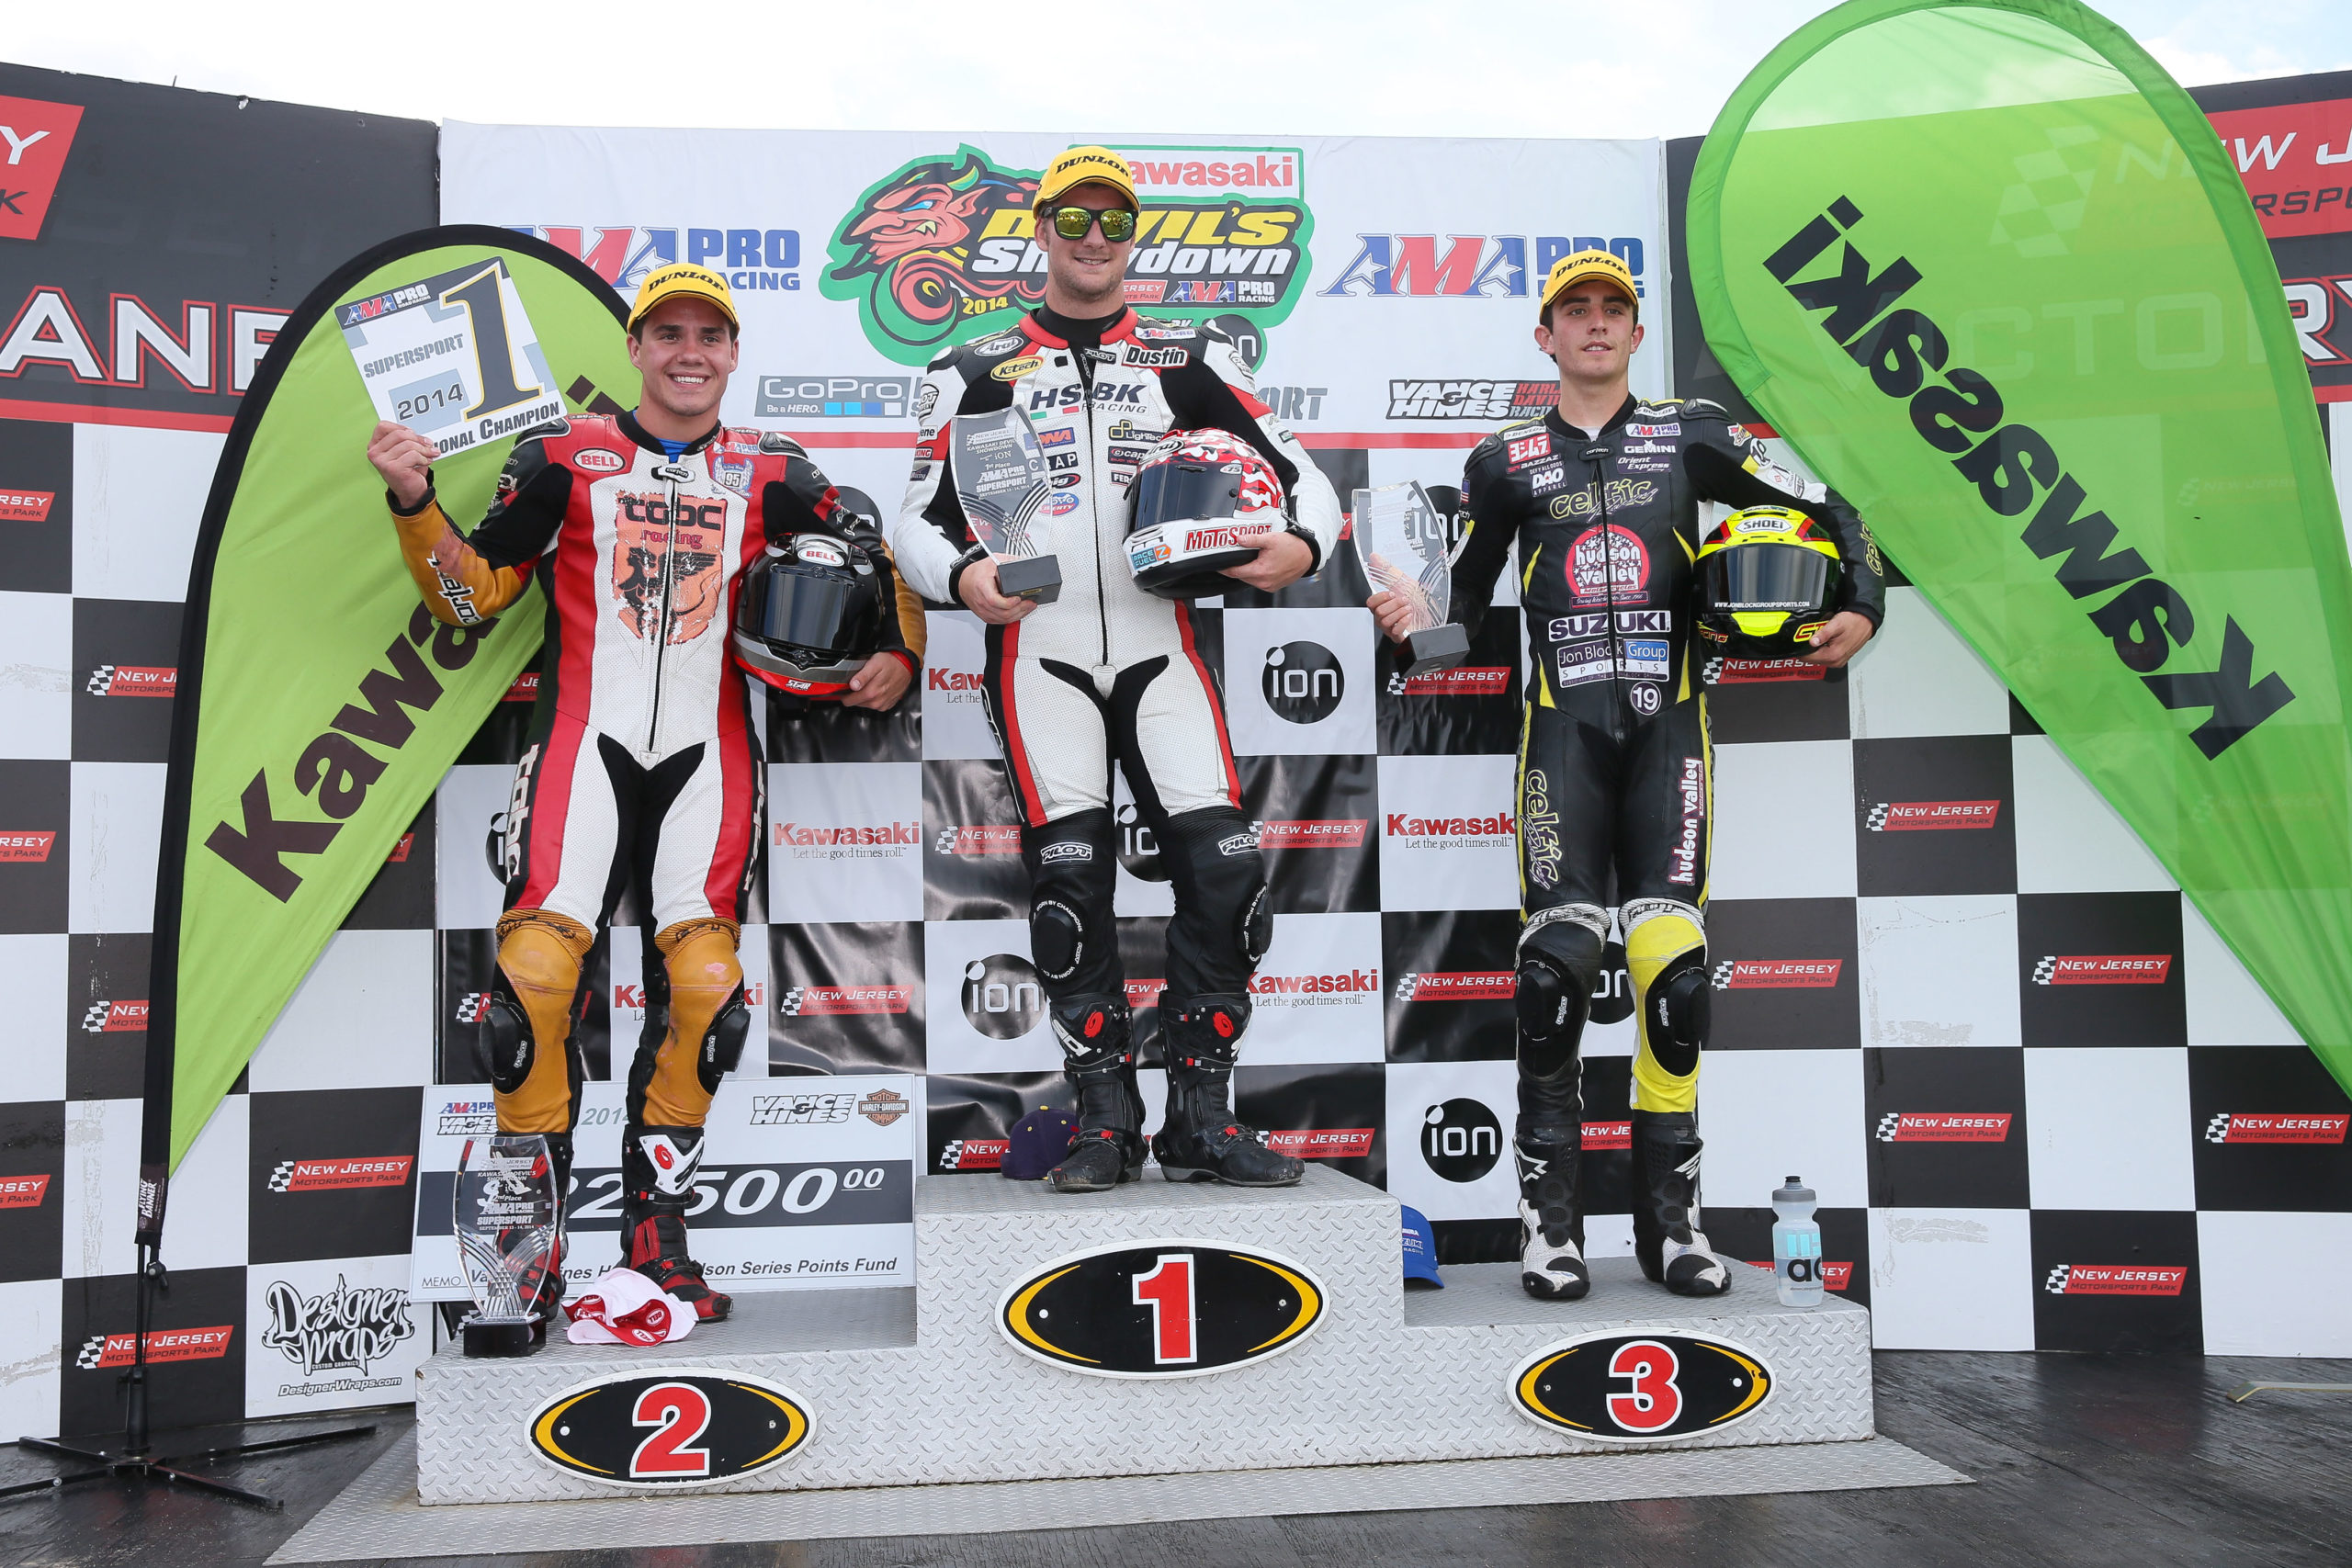 VIDEO: HSBK RACING’S DOMINGUEZ FINISHES THE SEASON WITH A WIN